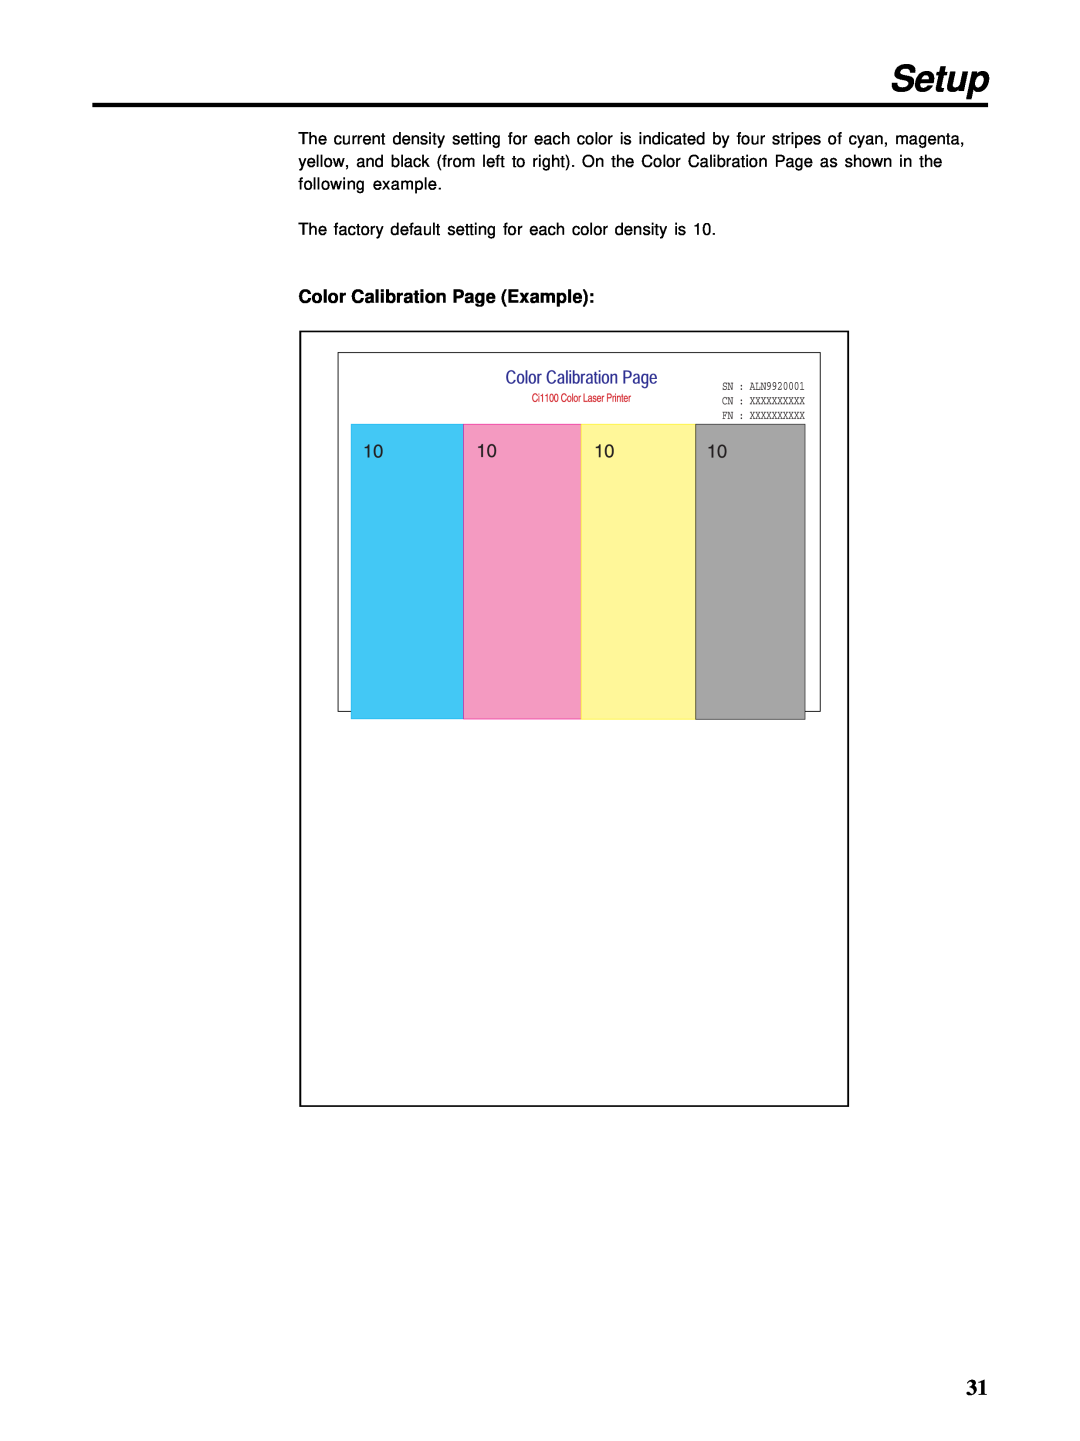 HP Ci 1100 manual Setup, Color Calibration Page Example, The factory default setting for each color density is 